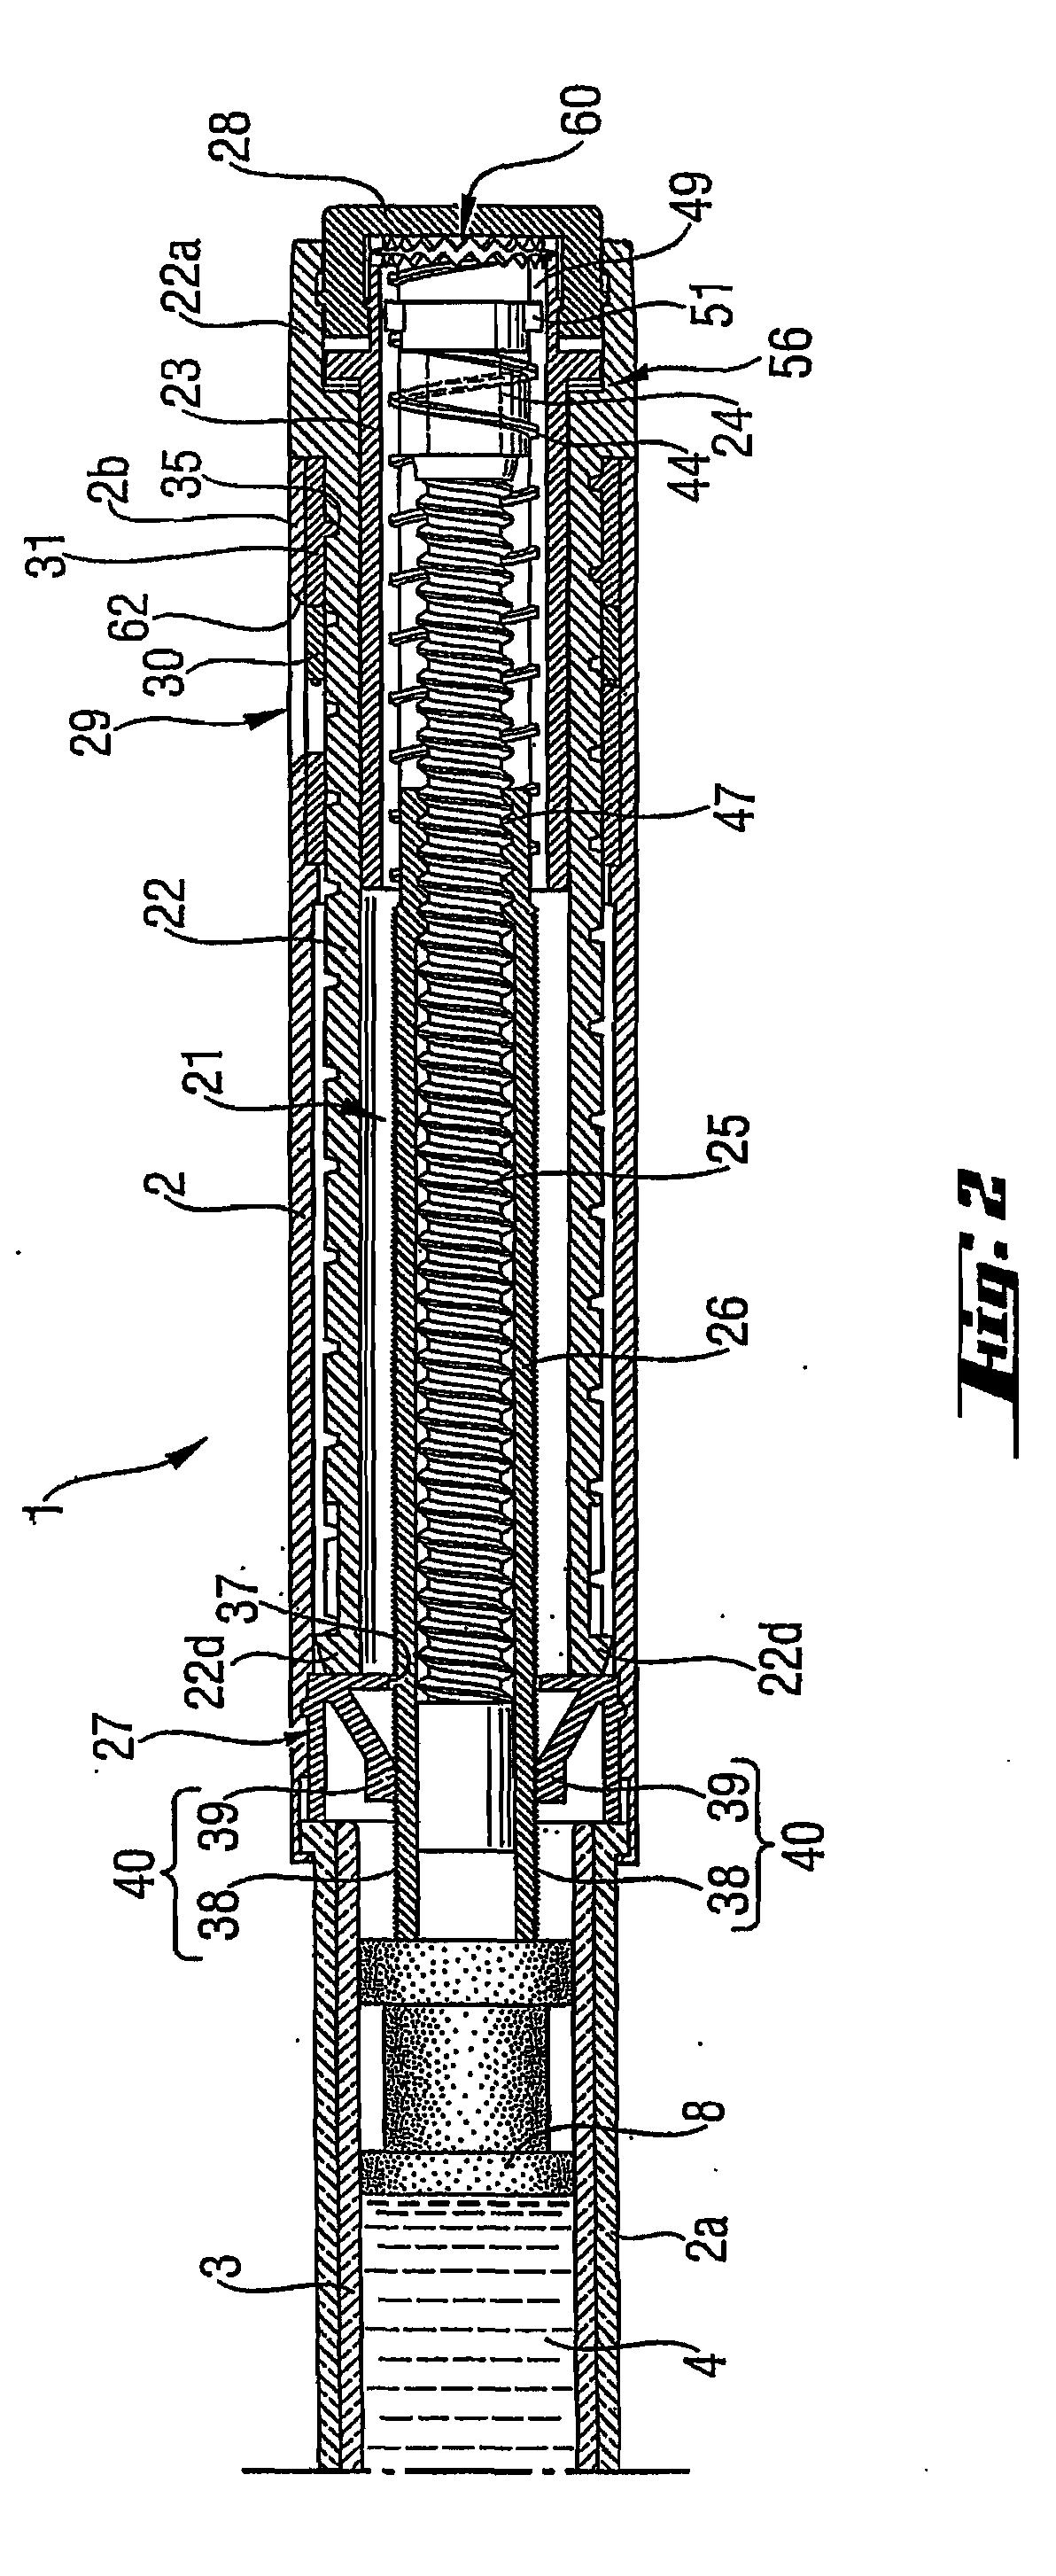 Drive Mechanism For A Drug Delivery Device